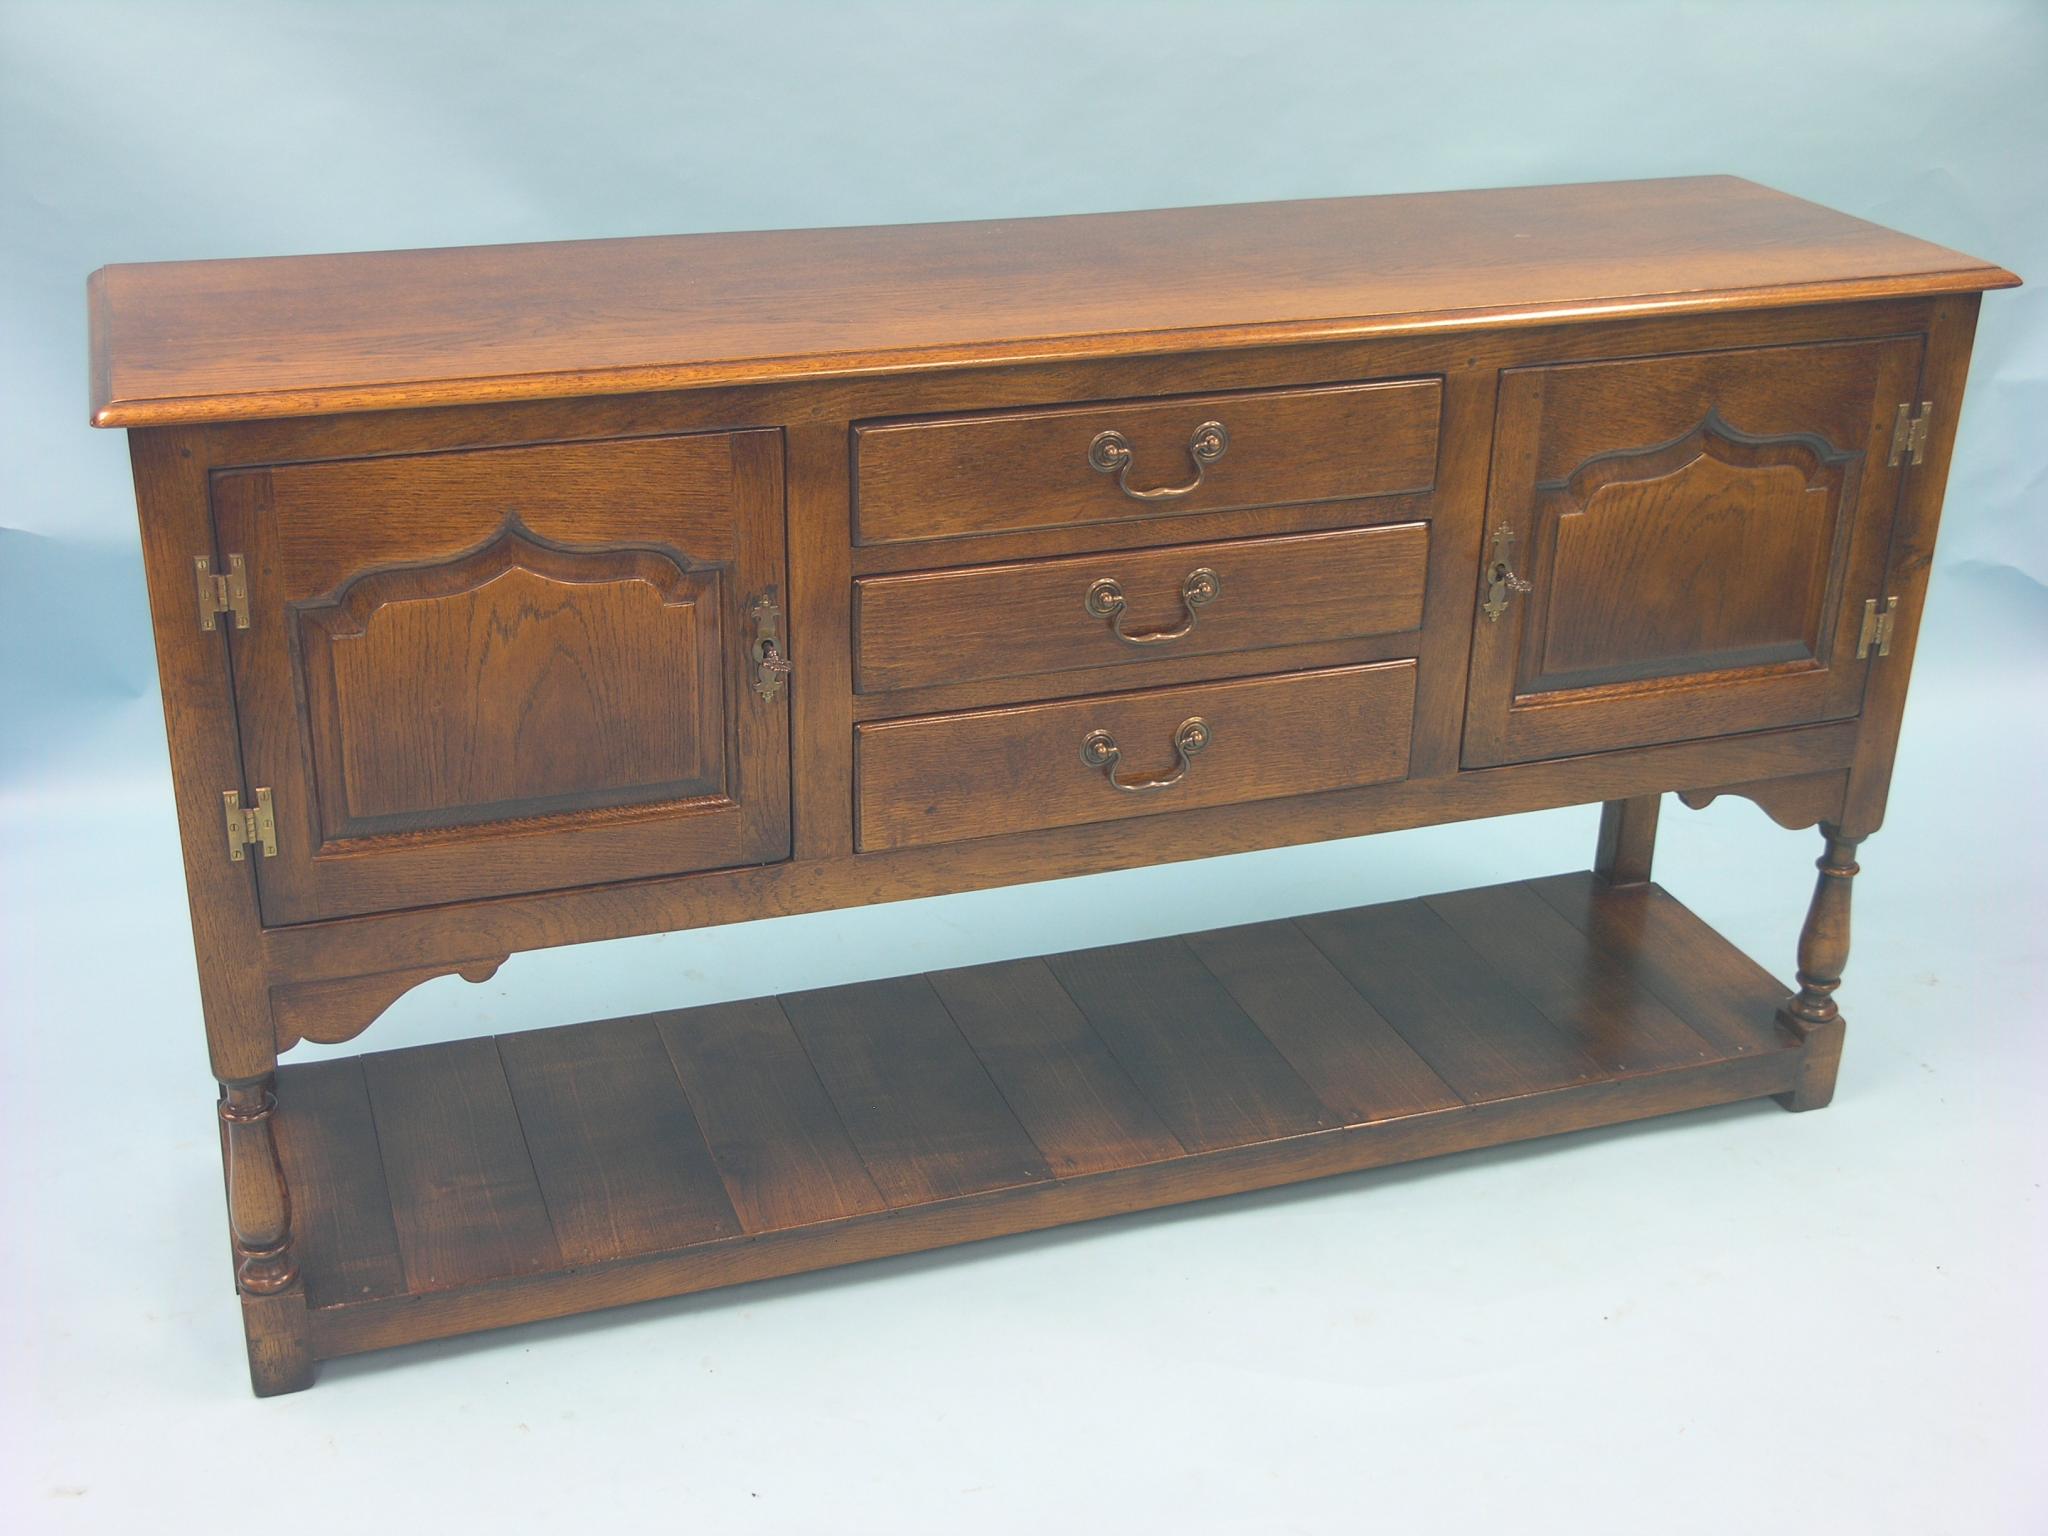 A good quality early 18th century-style oak dresser base, pair of arched and fielded panel